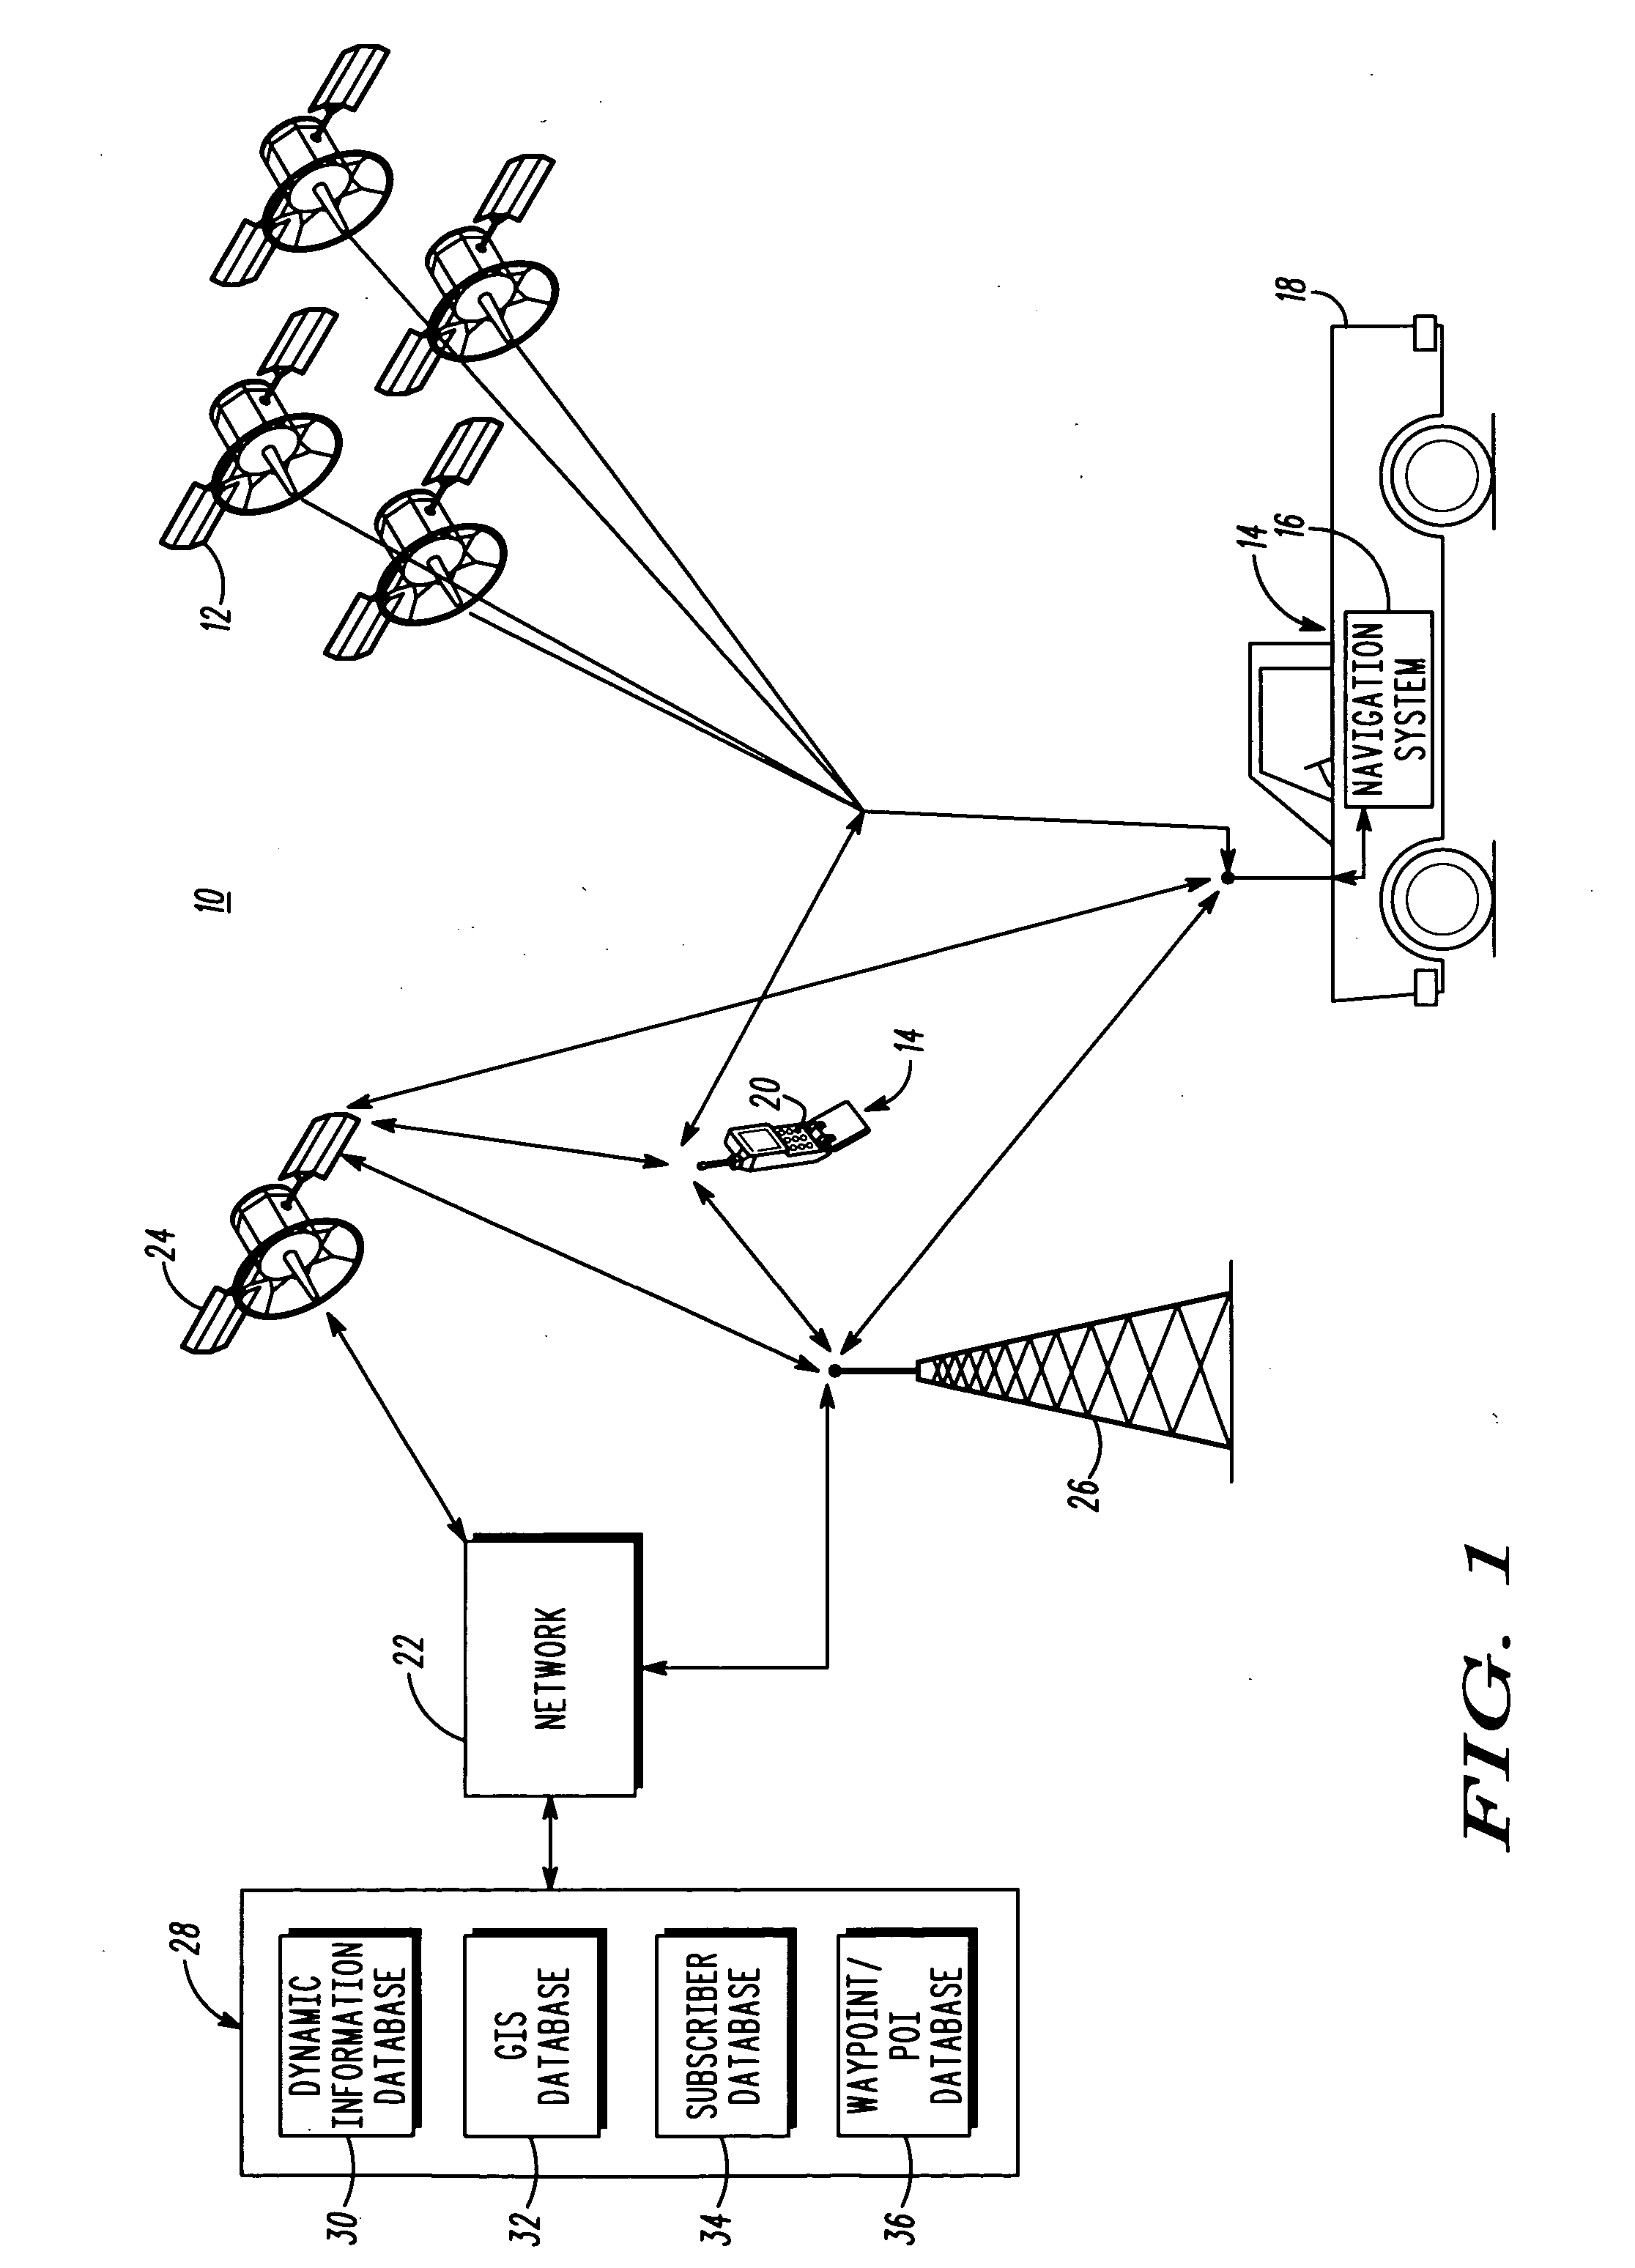 Method and apparatus for obtaining and providing information related to a point-of-interest